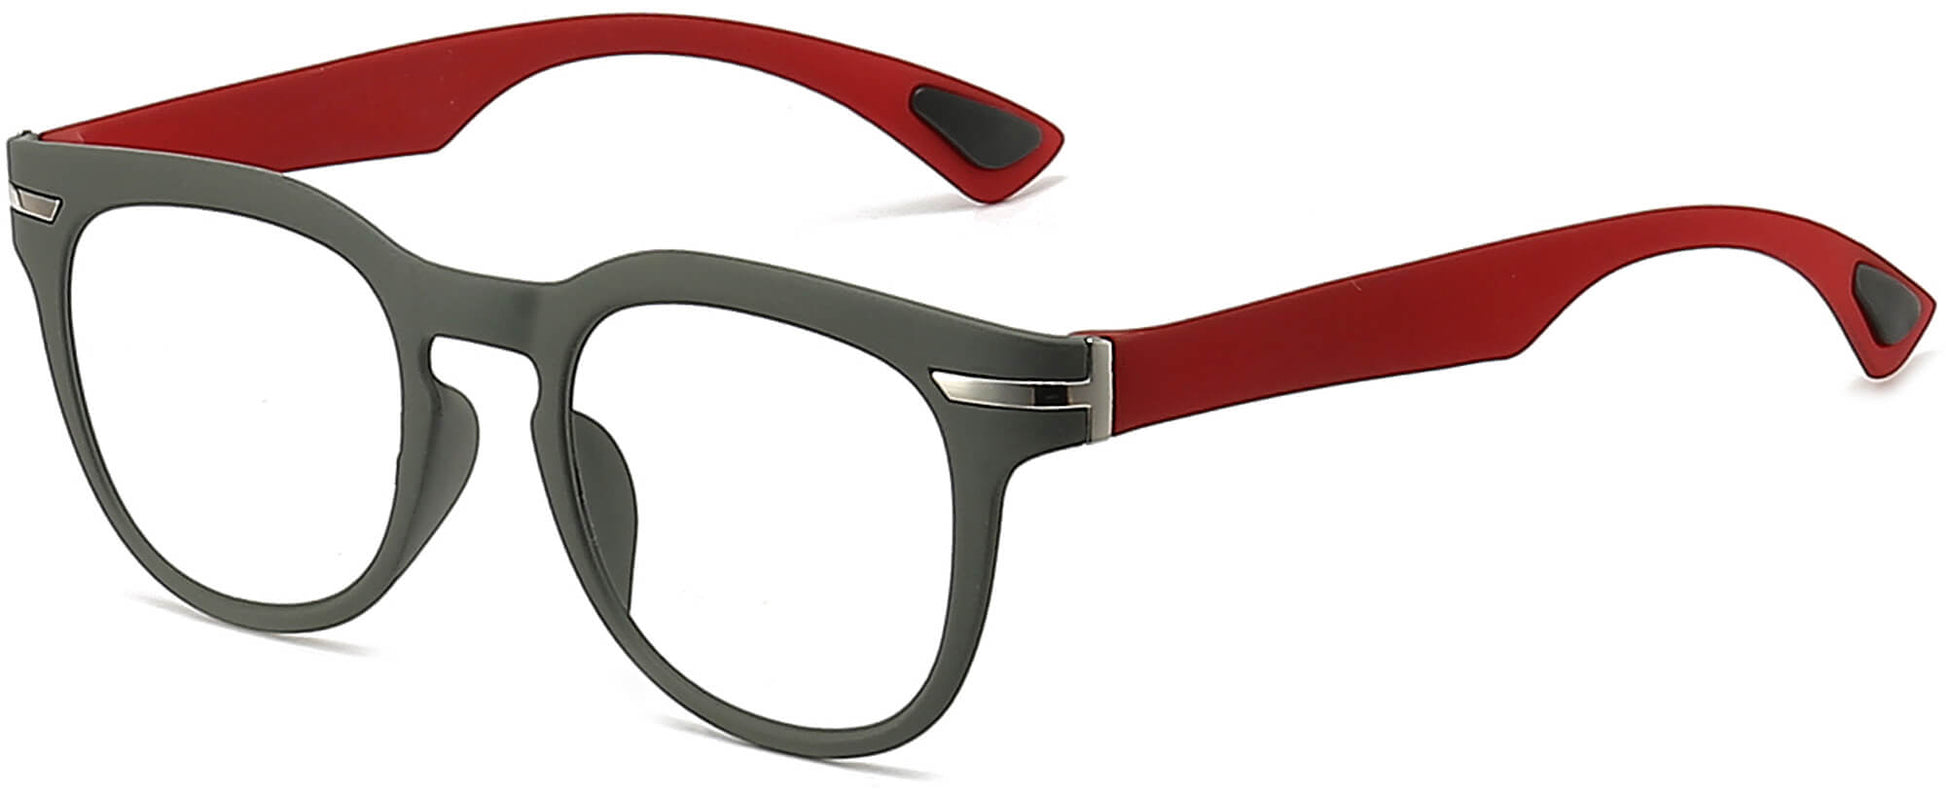 Maybach Round Gray Eyeglasses from ANRRI, angle view